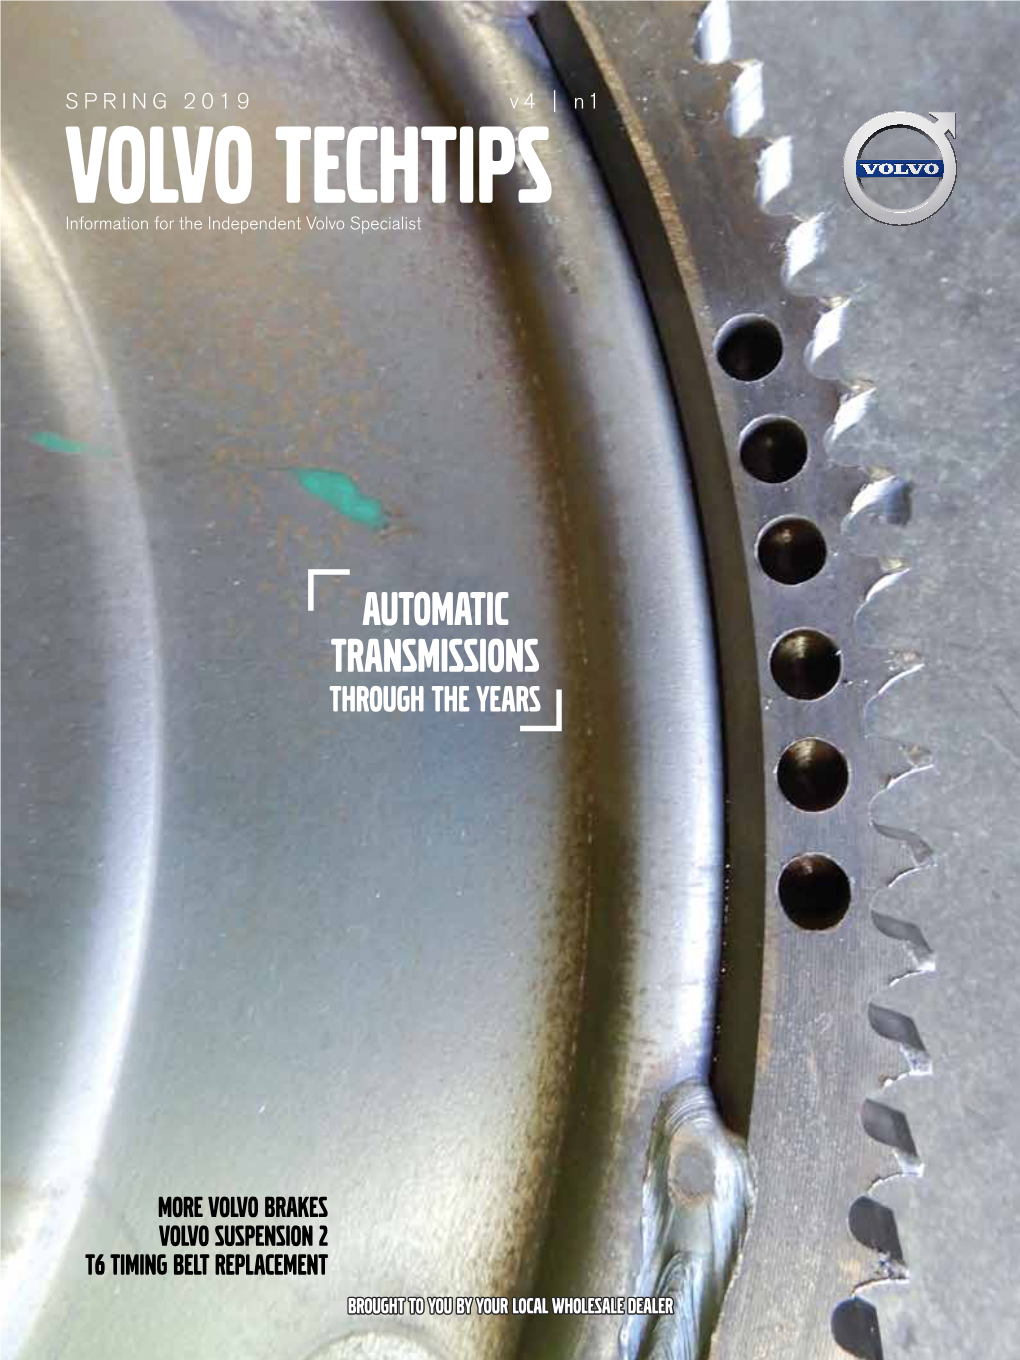 VOLVO TECHTIPS Information for the Independent Volvo Specialist